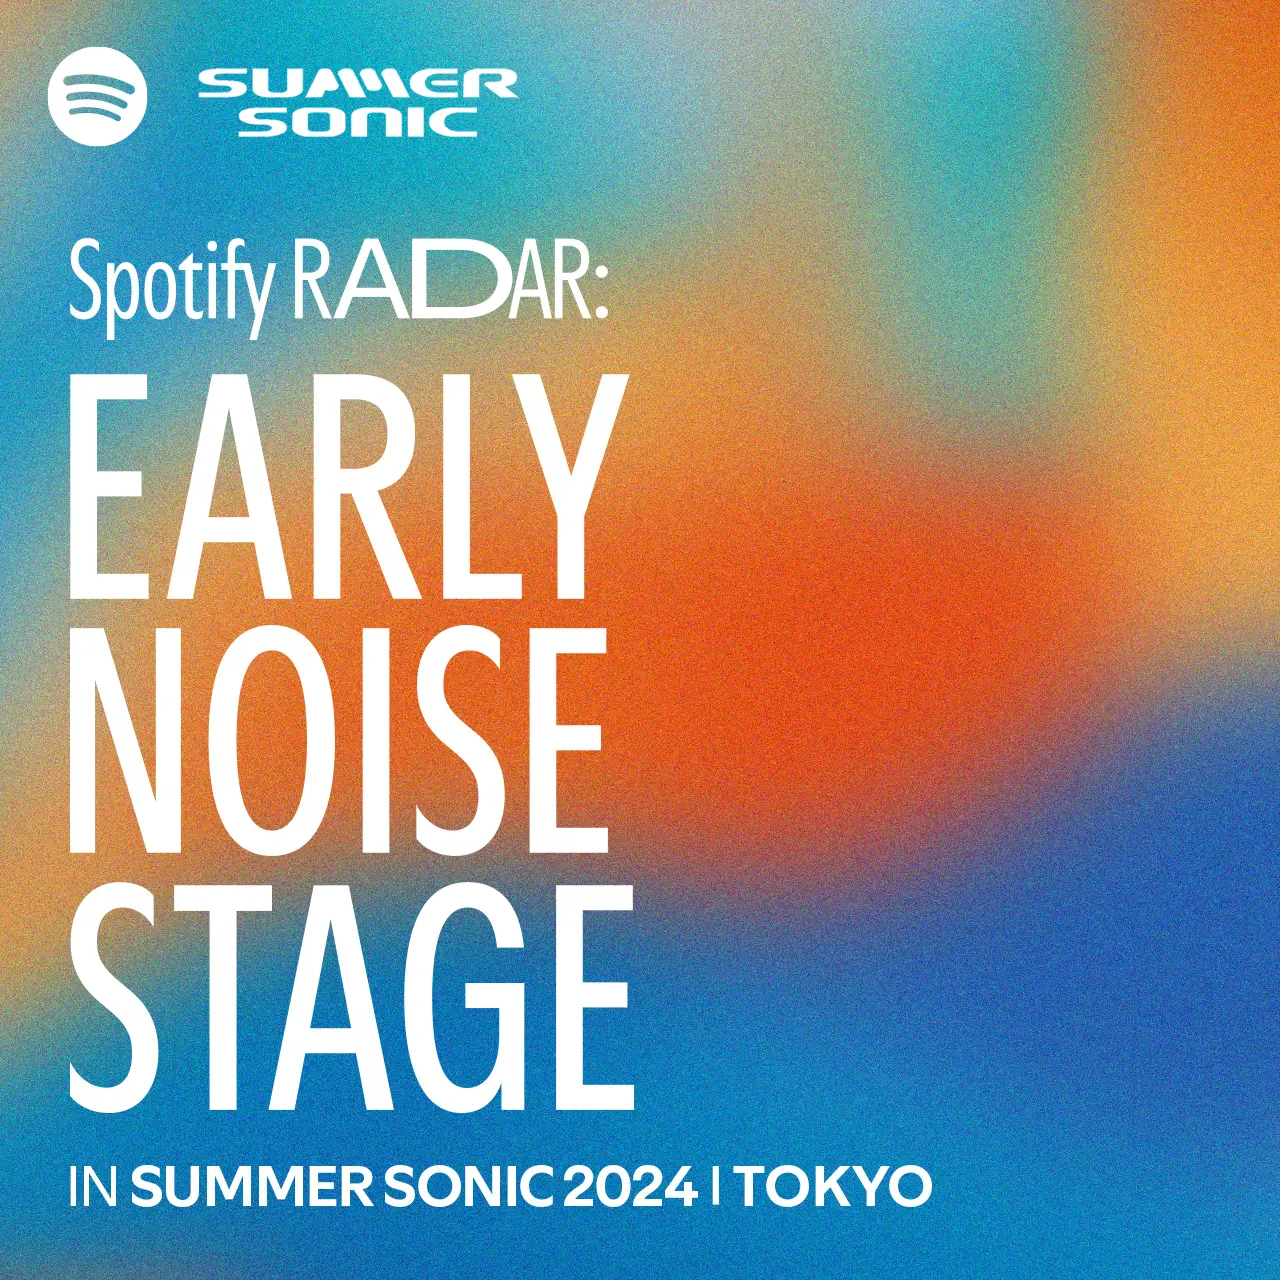 Spotify RADAR: Early Noise Stage IN SUMMER SONIC 2024 | TOKYO